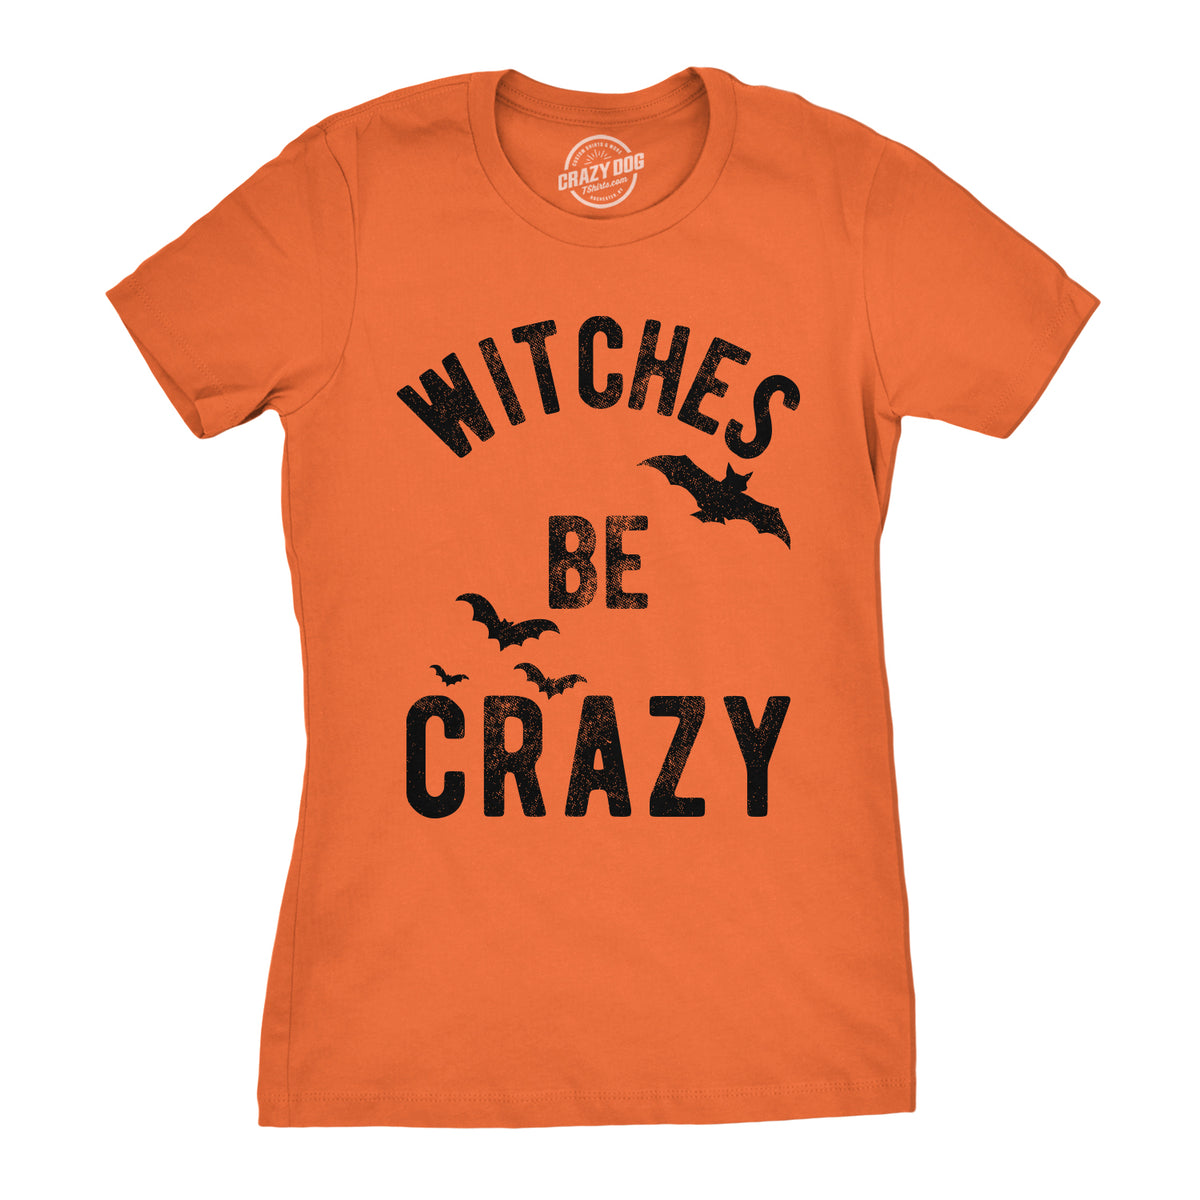 Funny Orange Witches Be Crazy Womens T Shirt Nerdy Halloween Tee